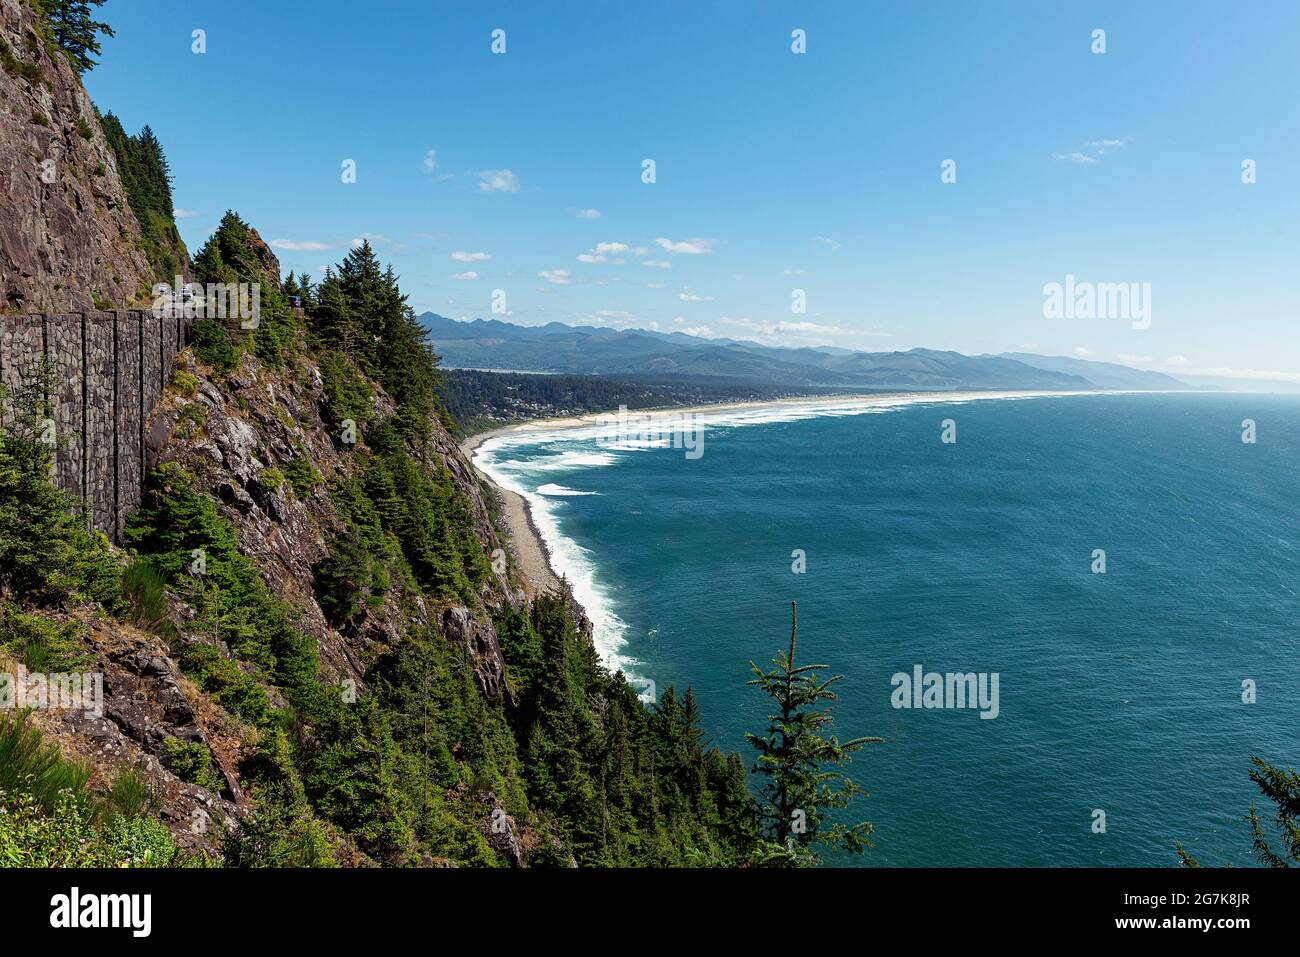 The Northern Oregon coast looking down on the town of Manzanita on HWY 101 in Oregon. Stock Photo